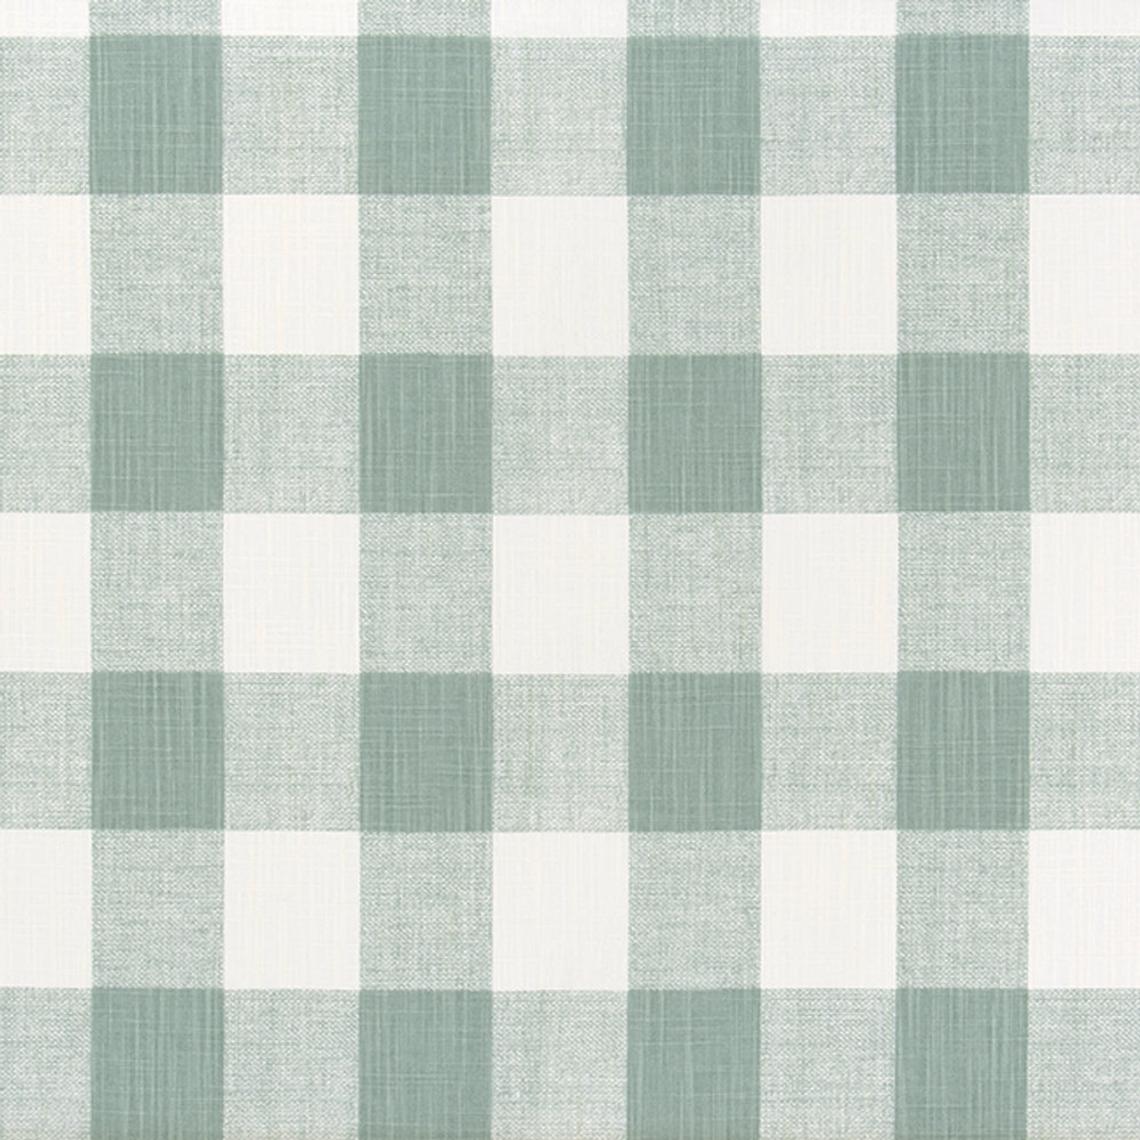 pinch pleated curtains in anderson waterbury spa green buffalo check plaid